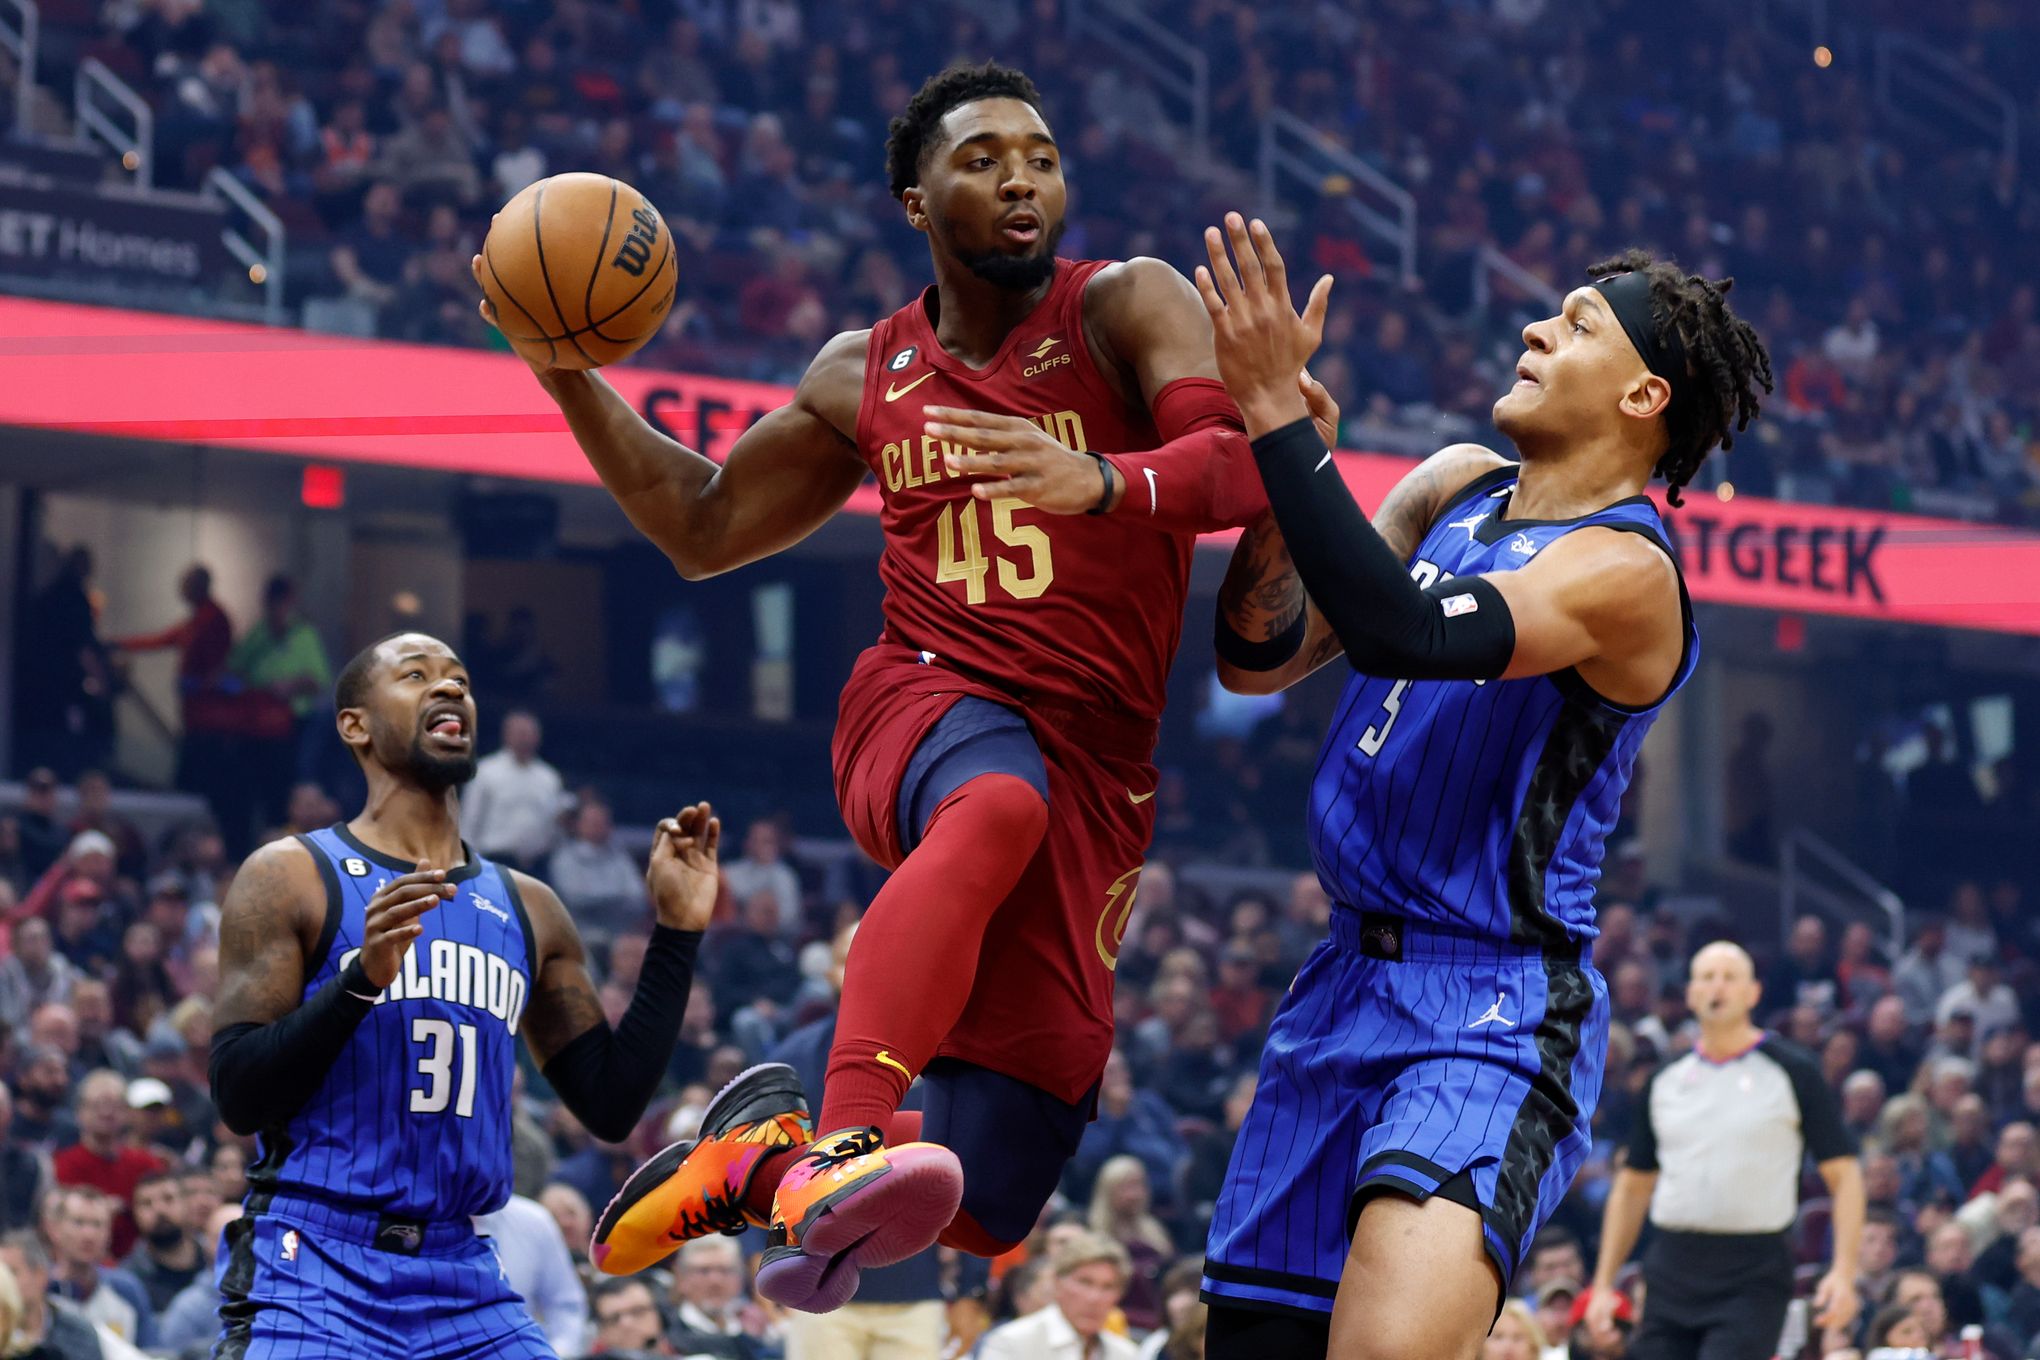 Mobley has 22 points, Cavs beat Magic for 3rd win in row